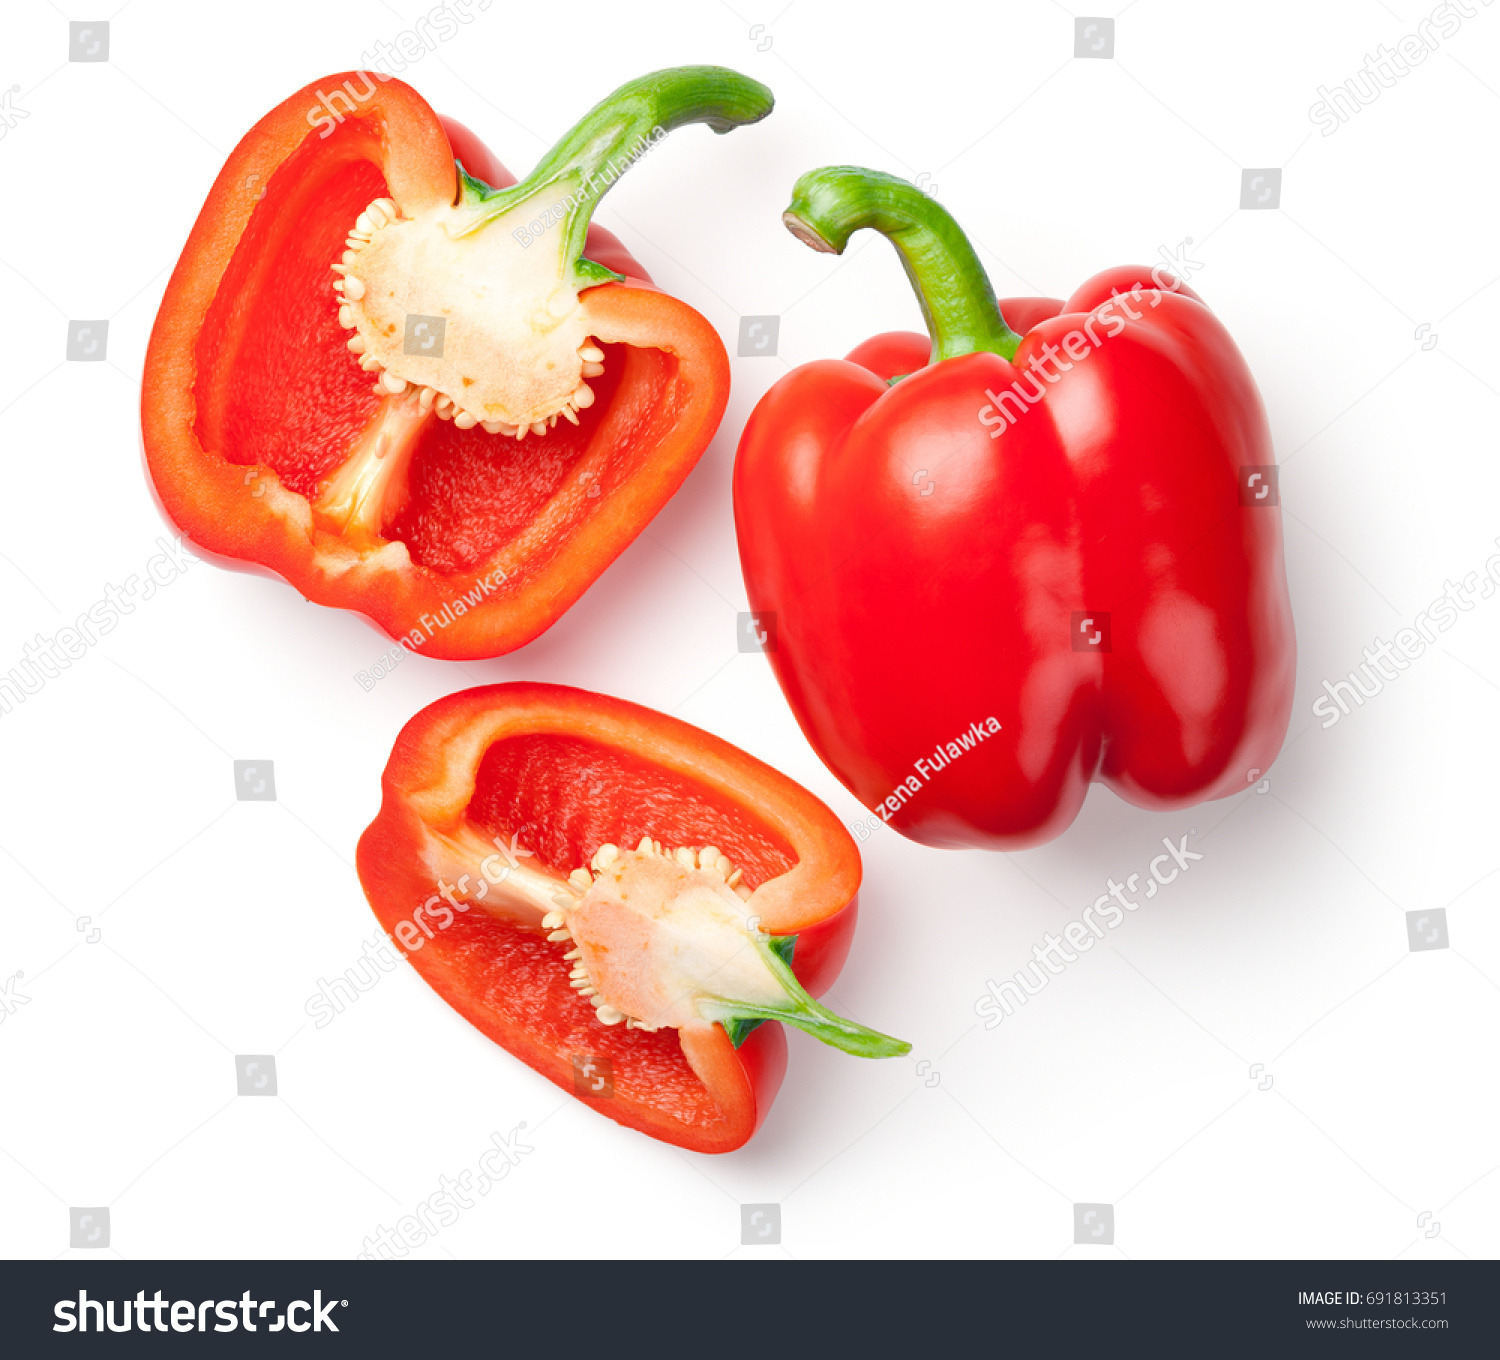 Red peppers isolated on white background. Top view #691813351